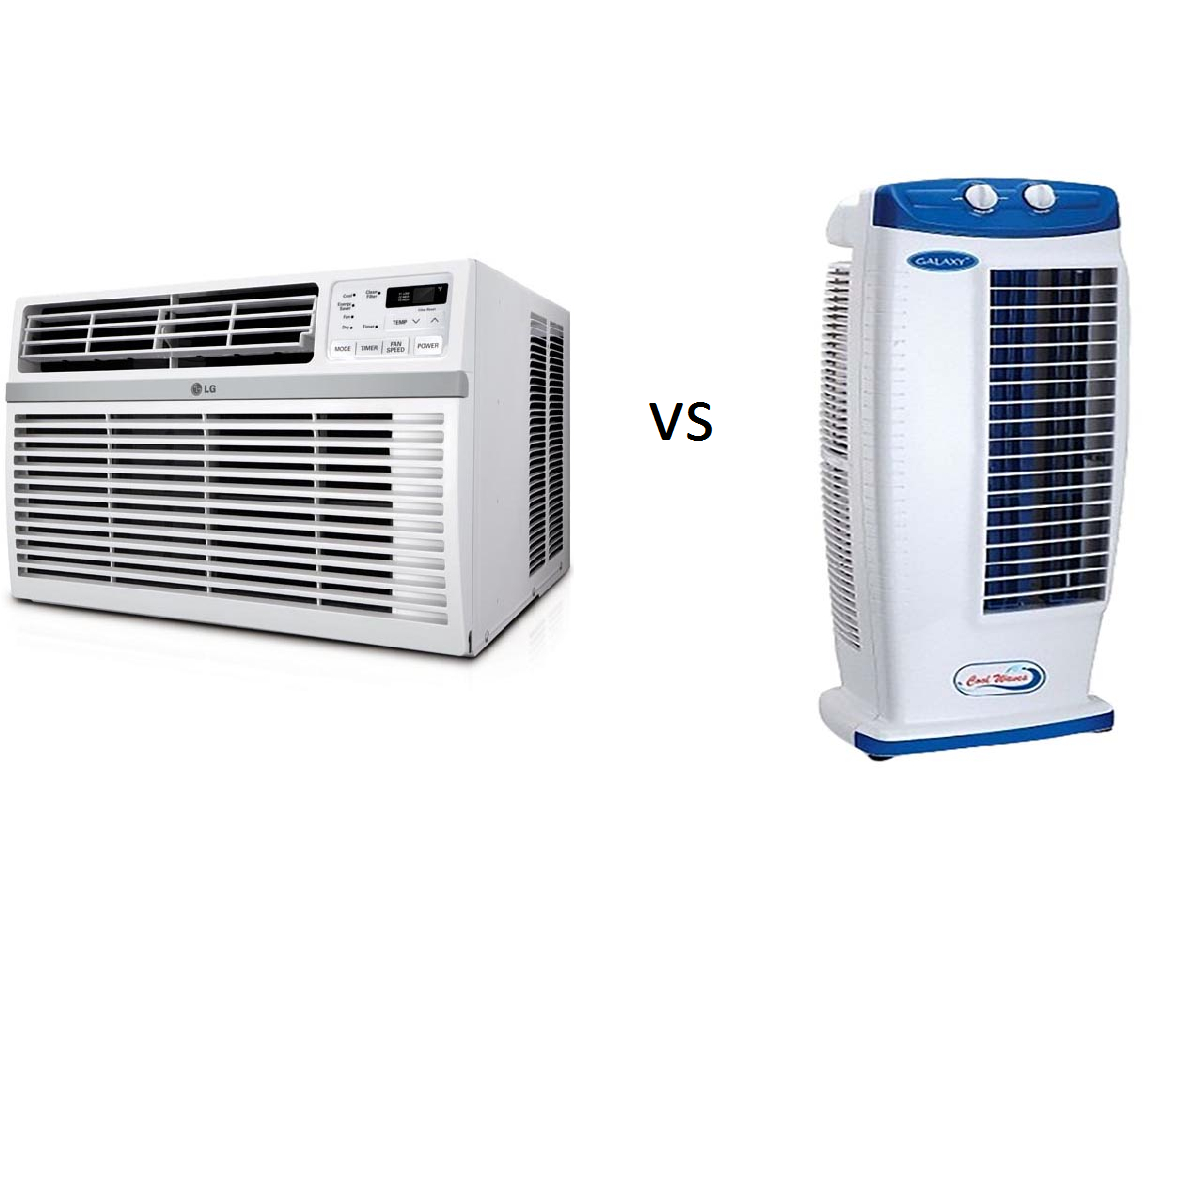 Window Ac Units Vs Tower Fans Which One To Choose throughout proportions 1200 X 1200